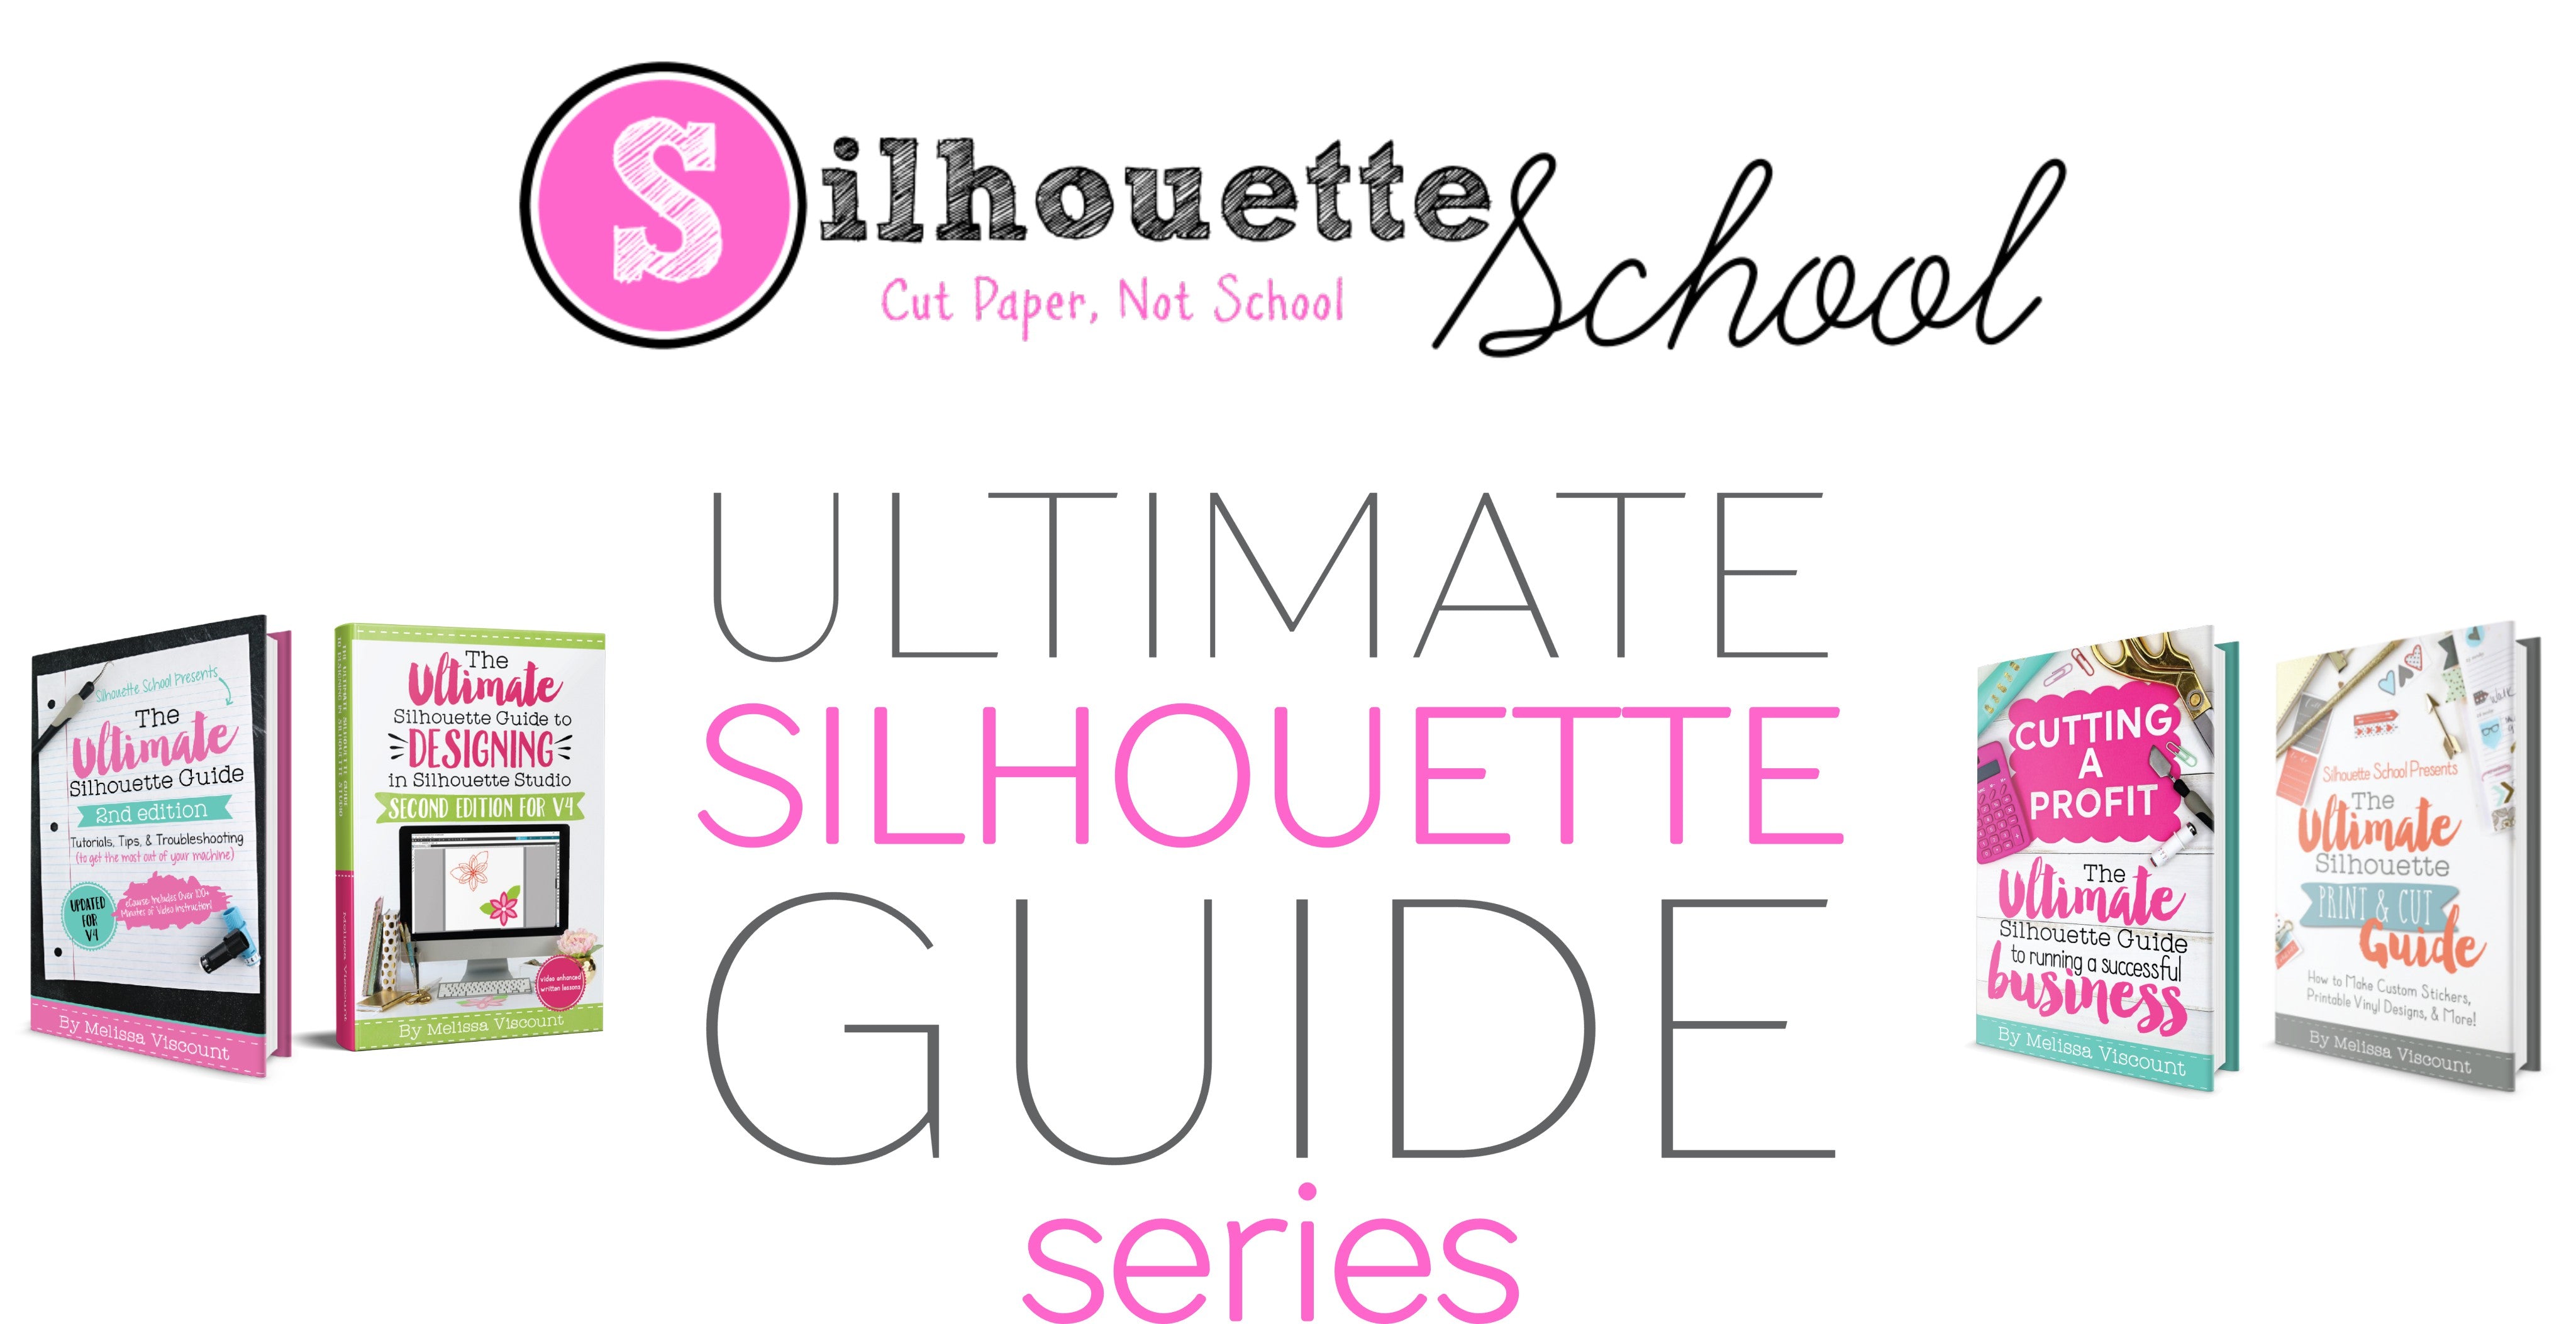 New!! Ultimate Silhouette Guide for CAMEO 4 is here!! And 20% Off